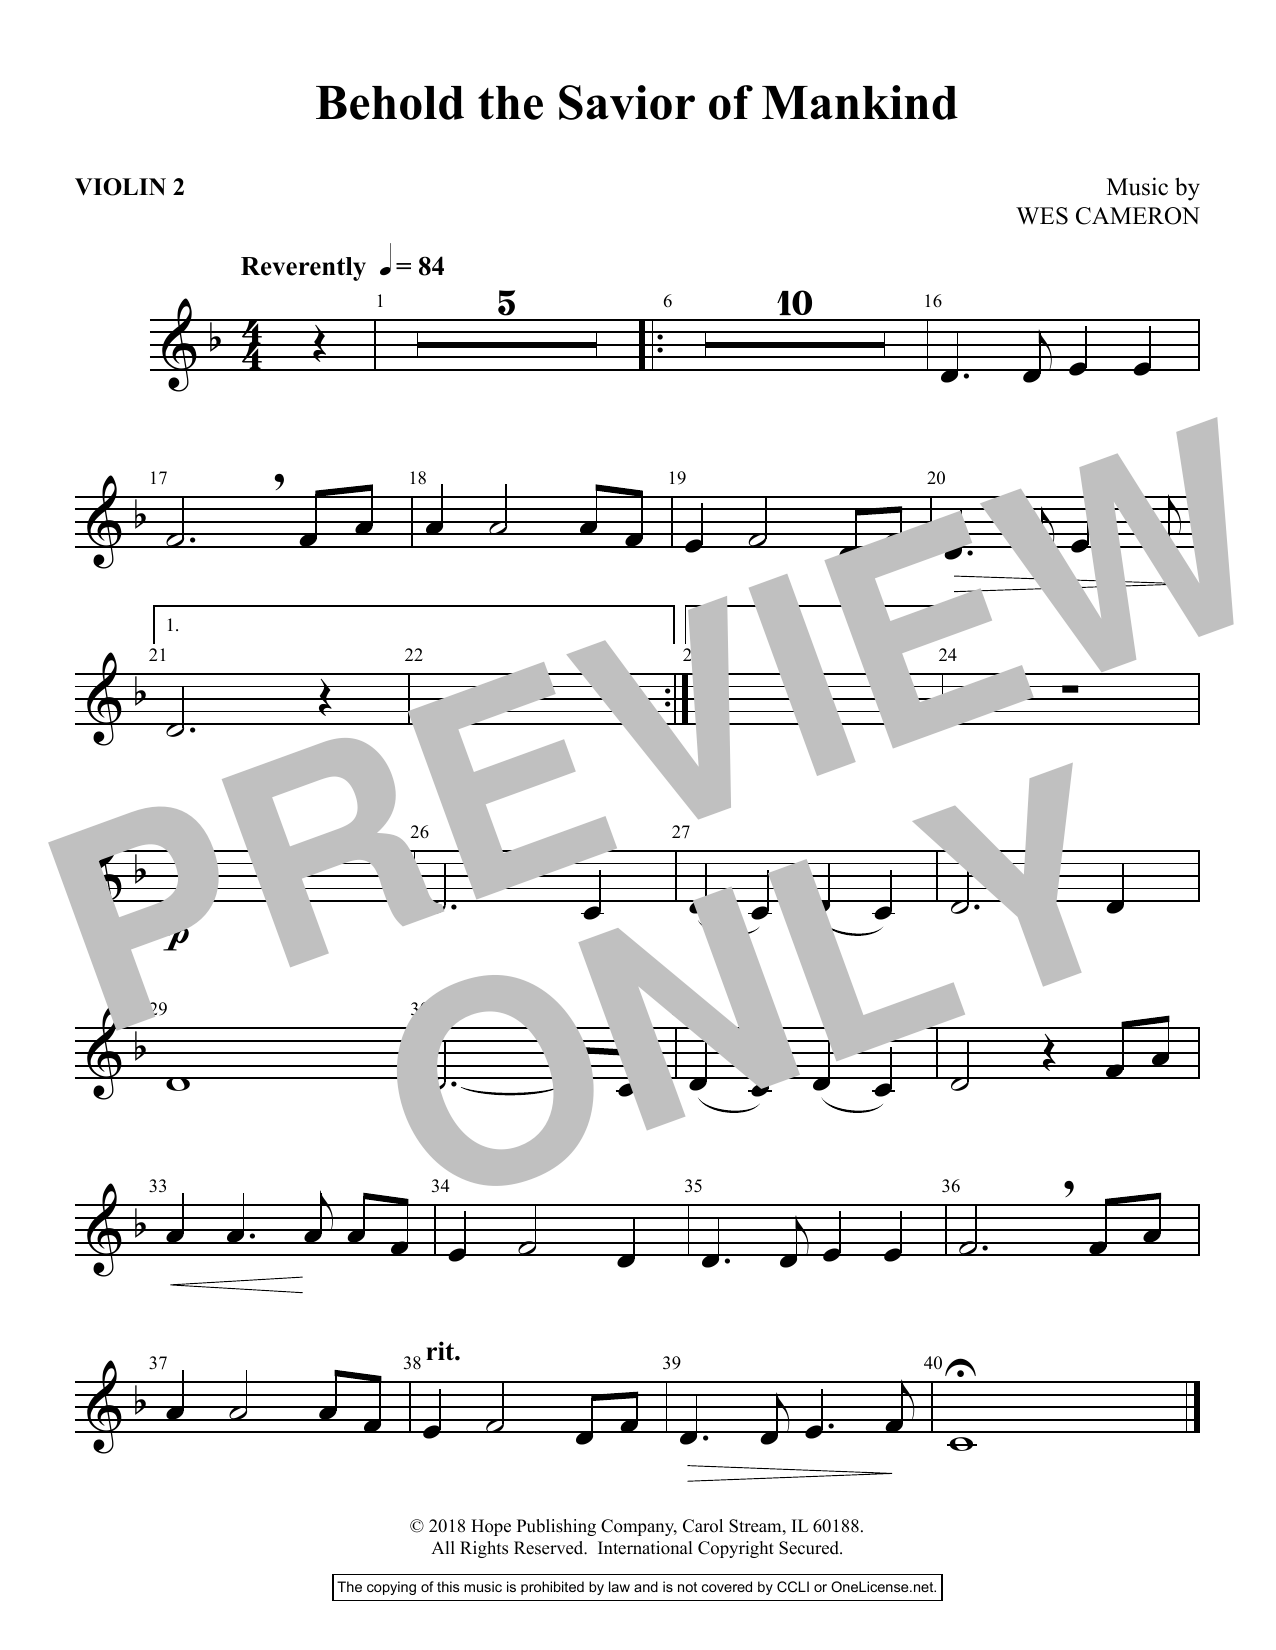 Download Wes Cameron Behold the Savior of Mankind - Violin 2 Sheet Music